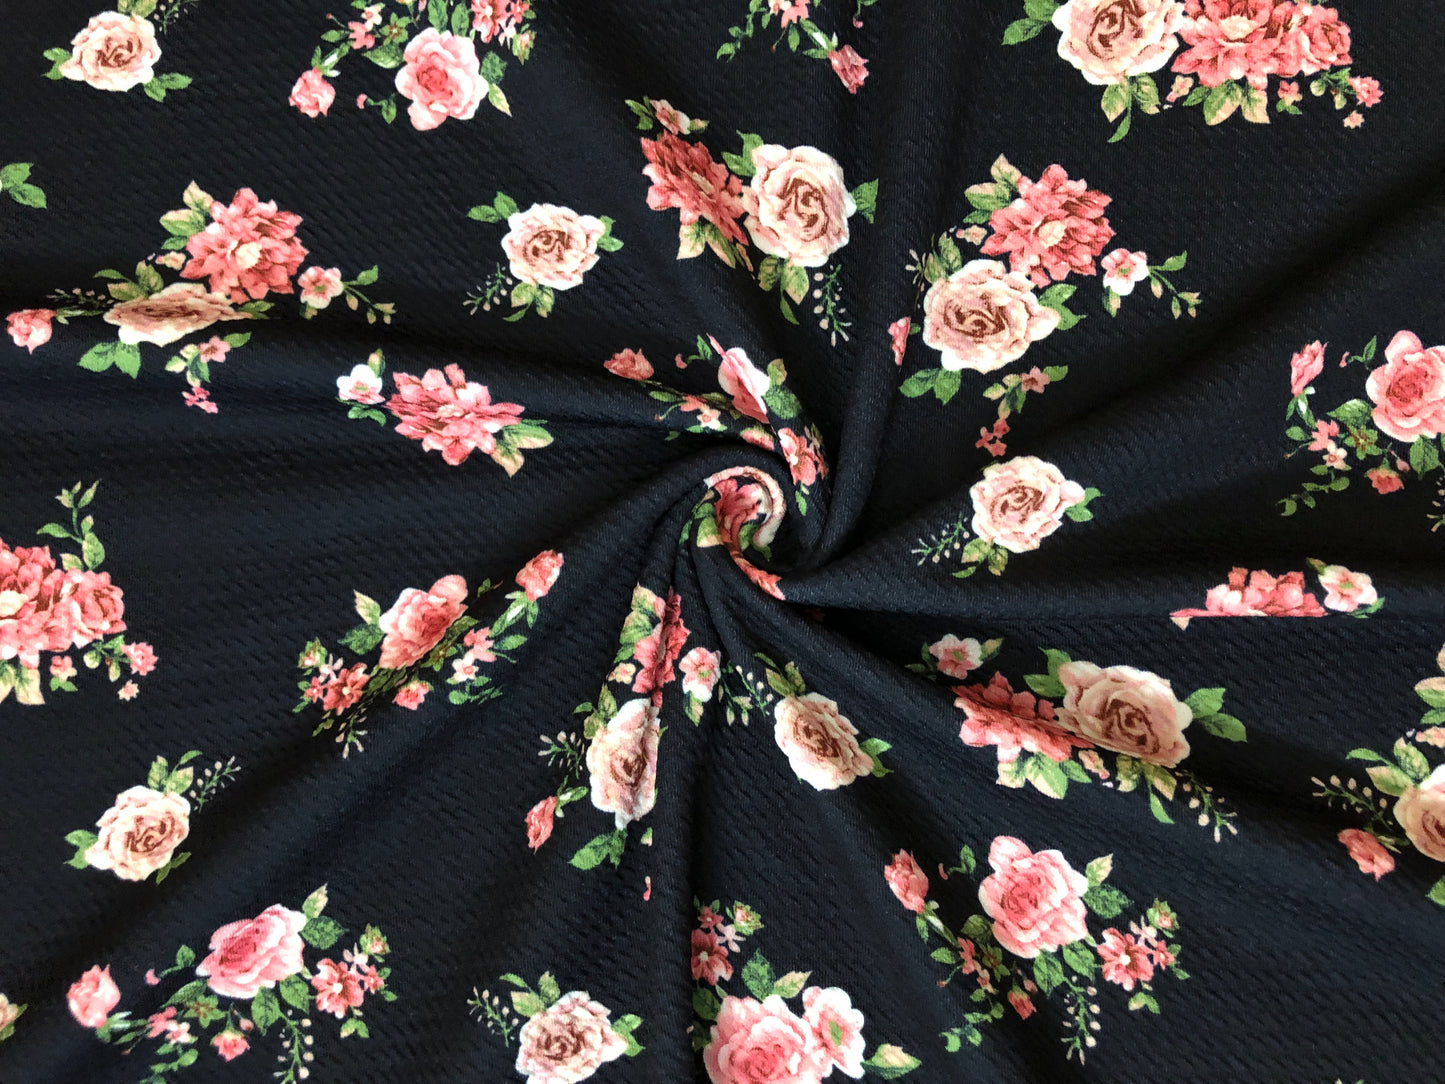 Bullet Knit Printed Fabric-Black Vanilla Roses-BPR276-Sold by the Yard